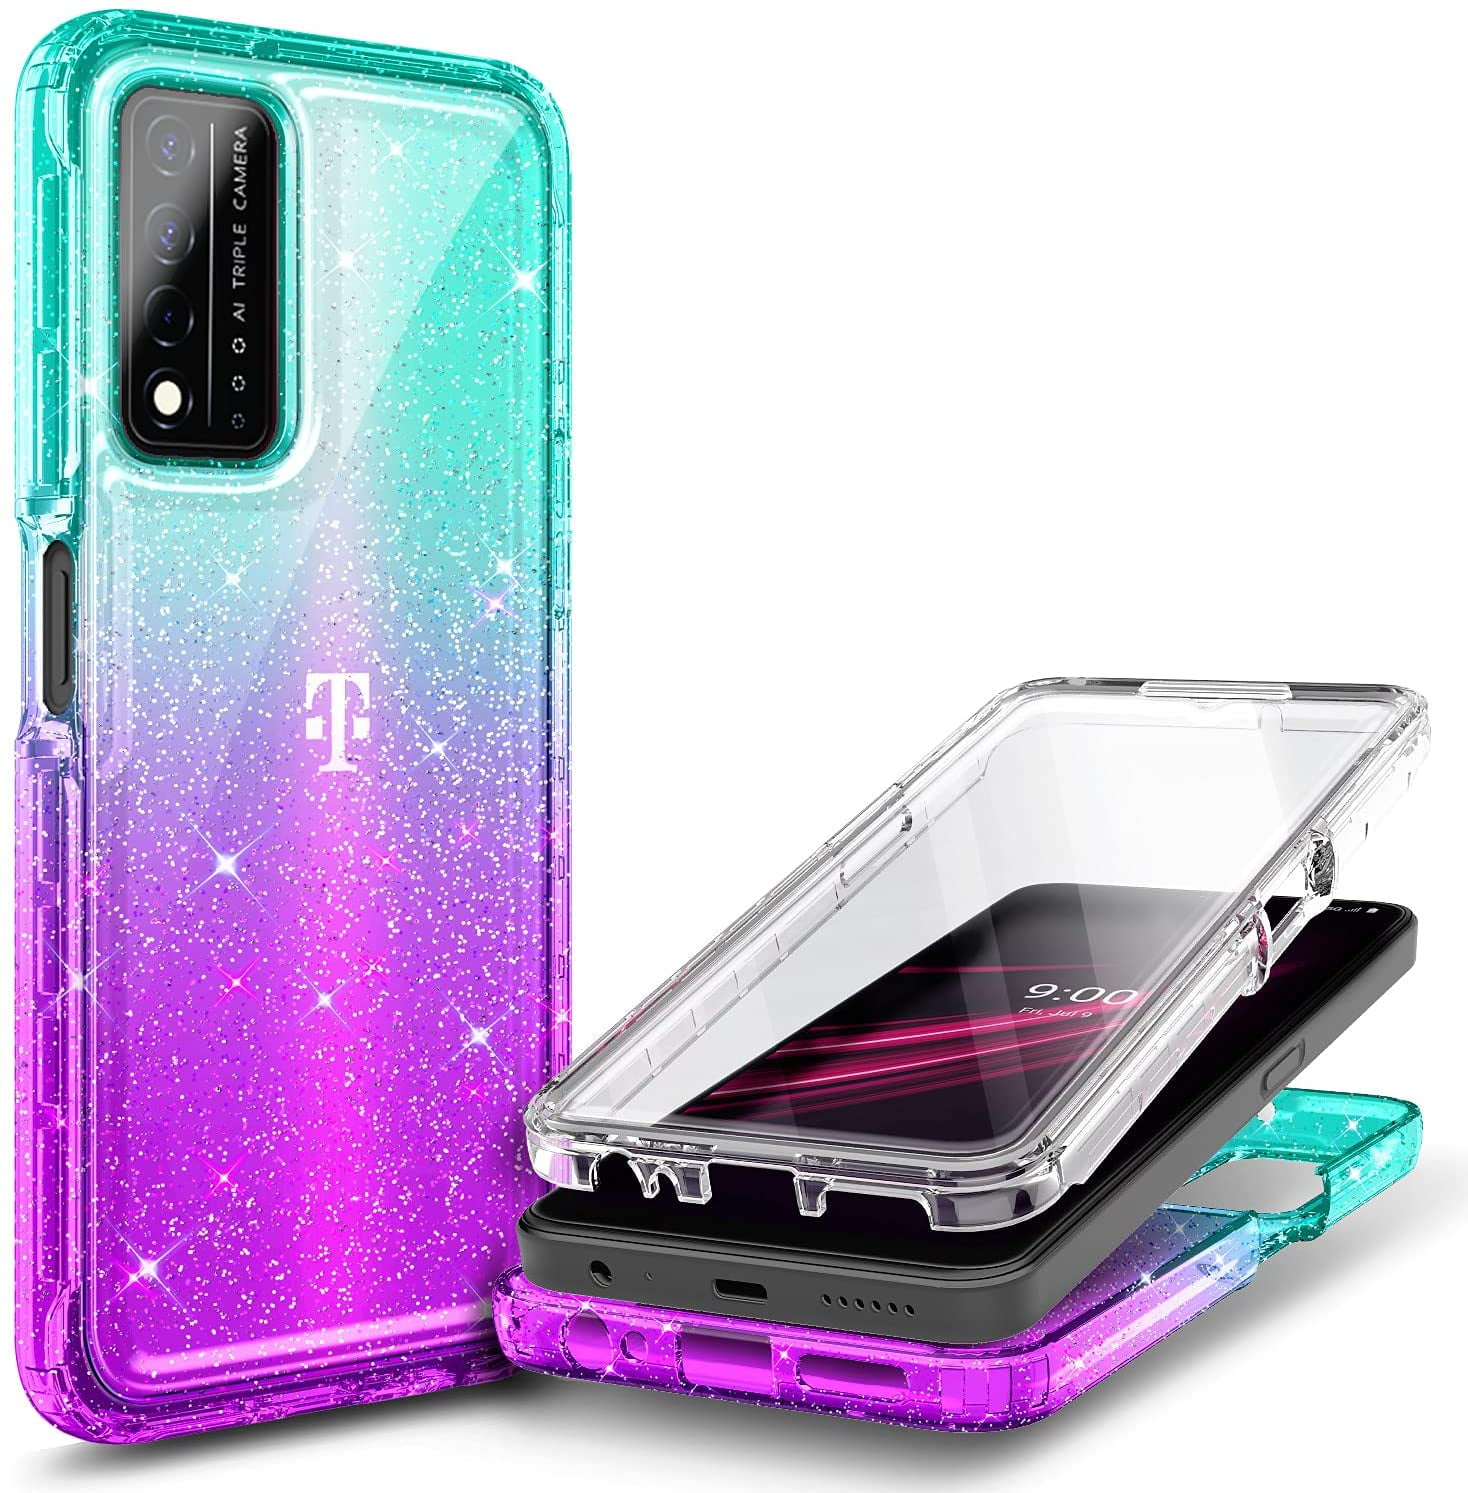 Glitter Pink/Aqua Impact Resist Durable Phone Case Full-Body Protective Shockproof Rugged Bumper Cover NZND Motorola Moto G Play 2021 Case with Built-in Screen Protector 